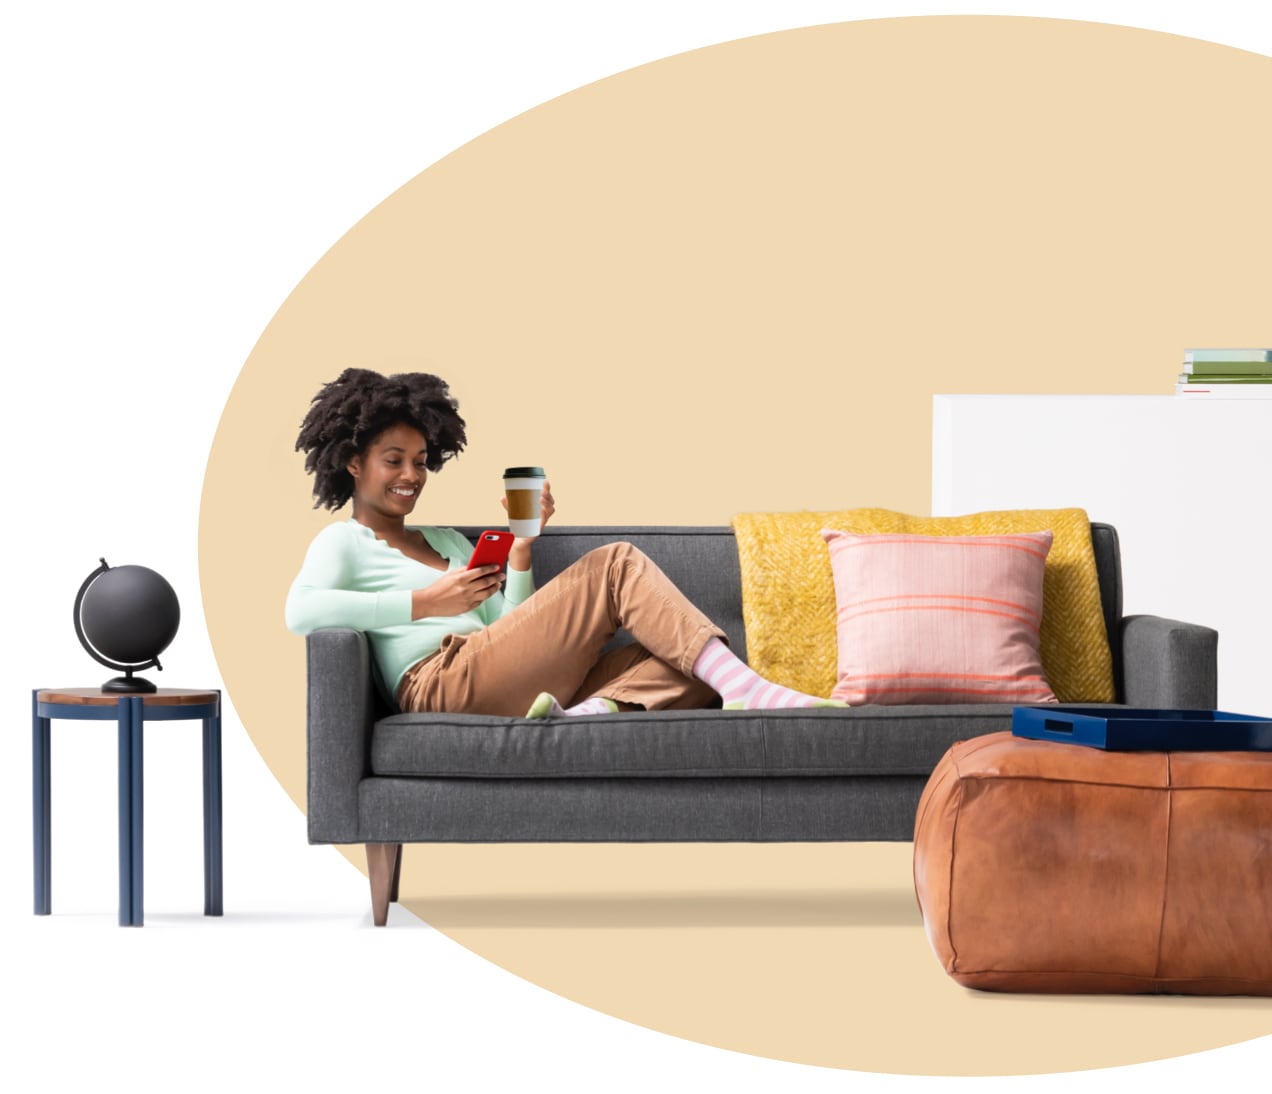 Woman sitting on couch holding a coffee while reading her iPhone about what renters insurance covers. A globe sits on side table.